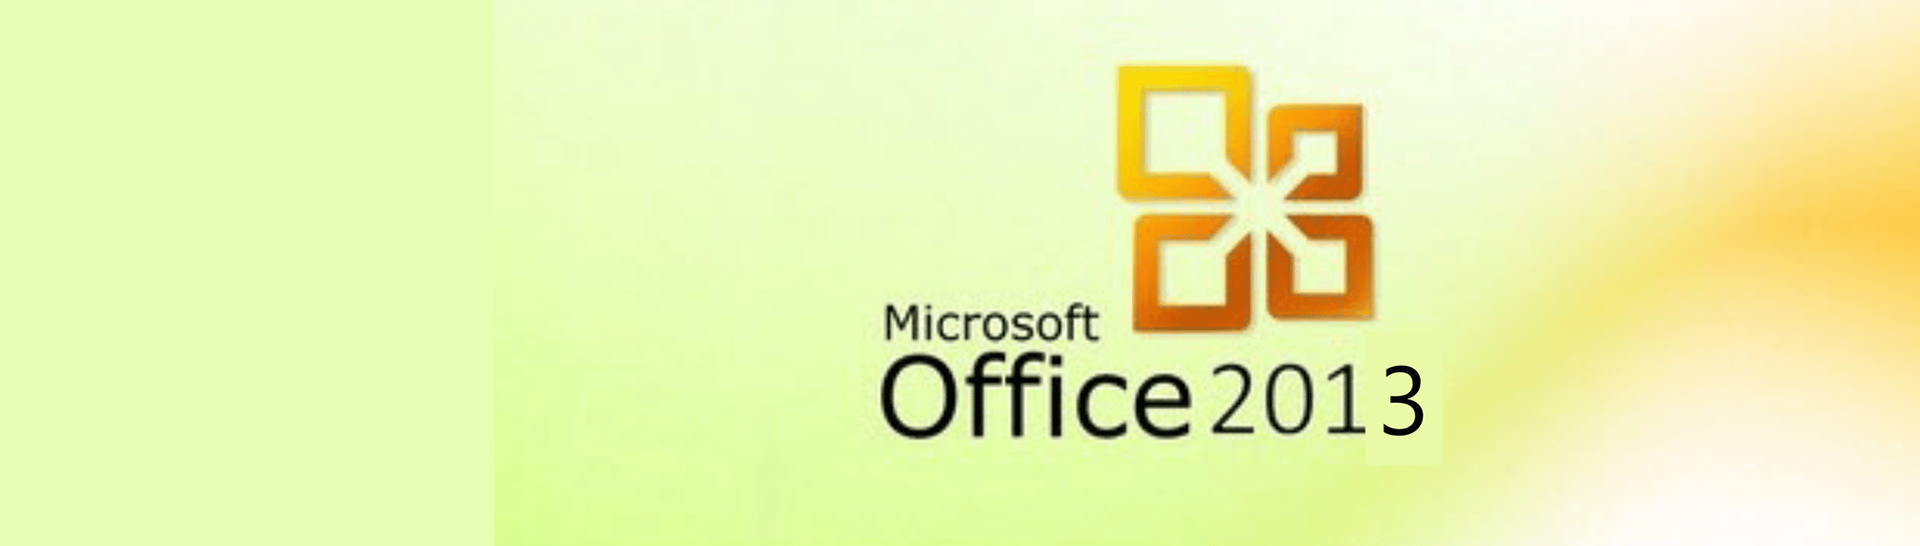 Office 2013 support ends resized